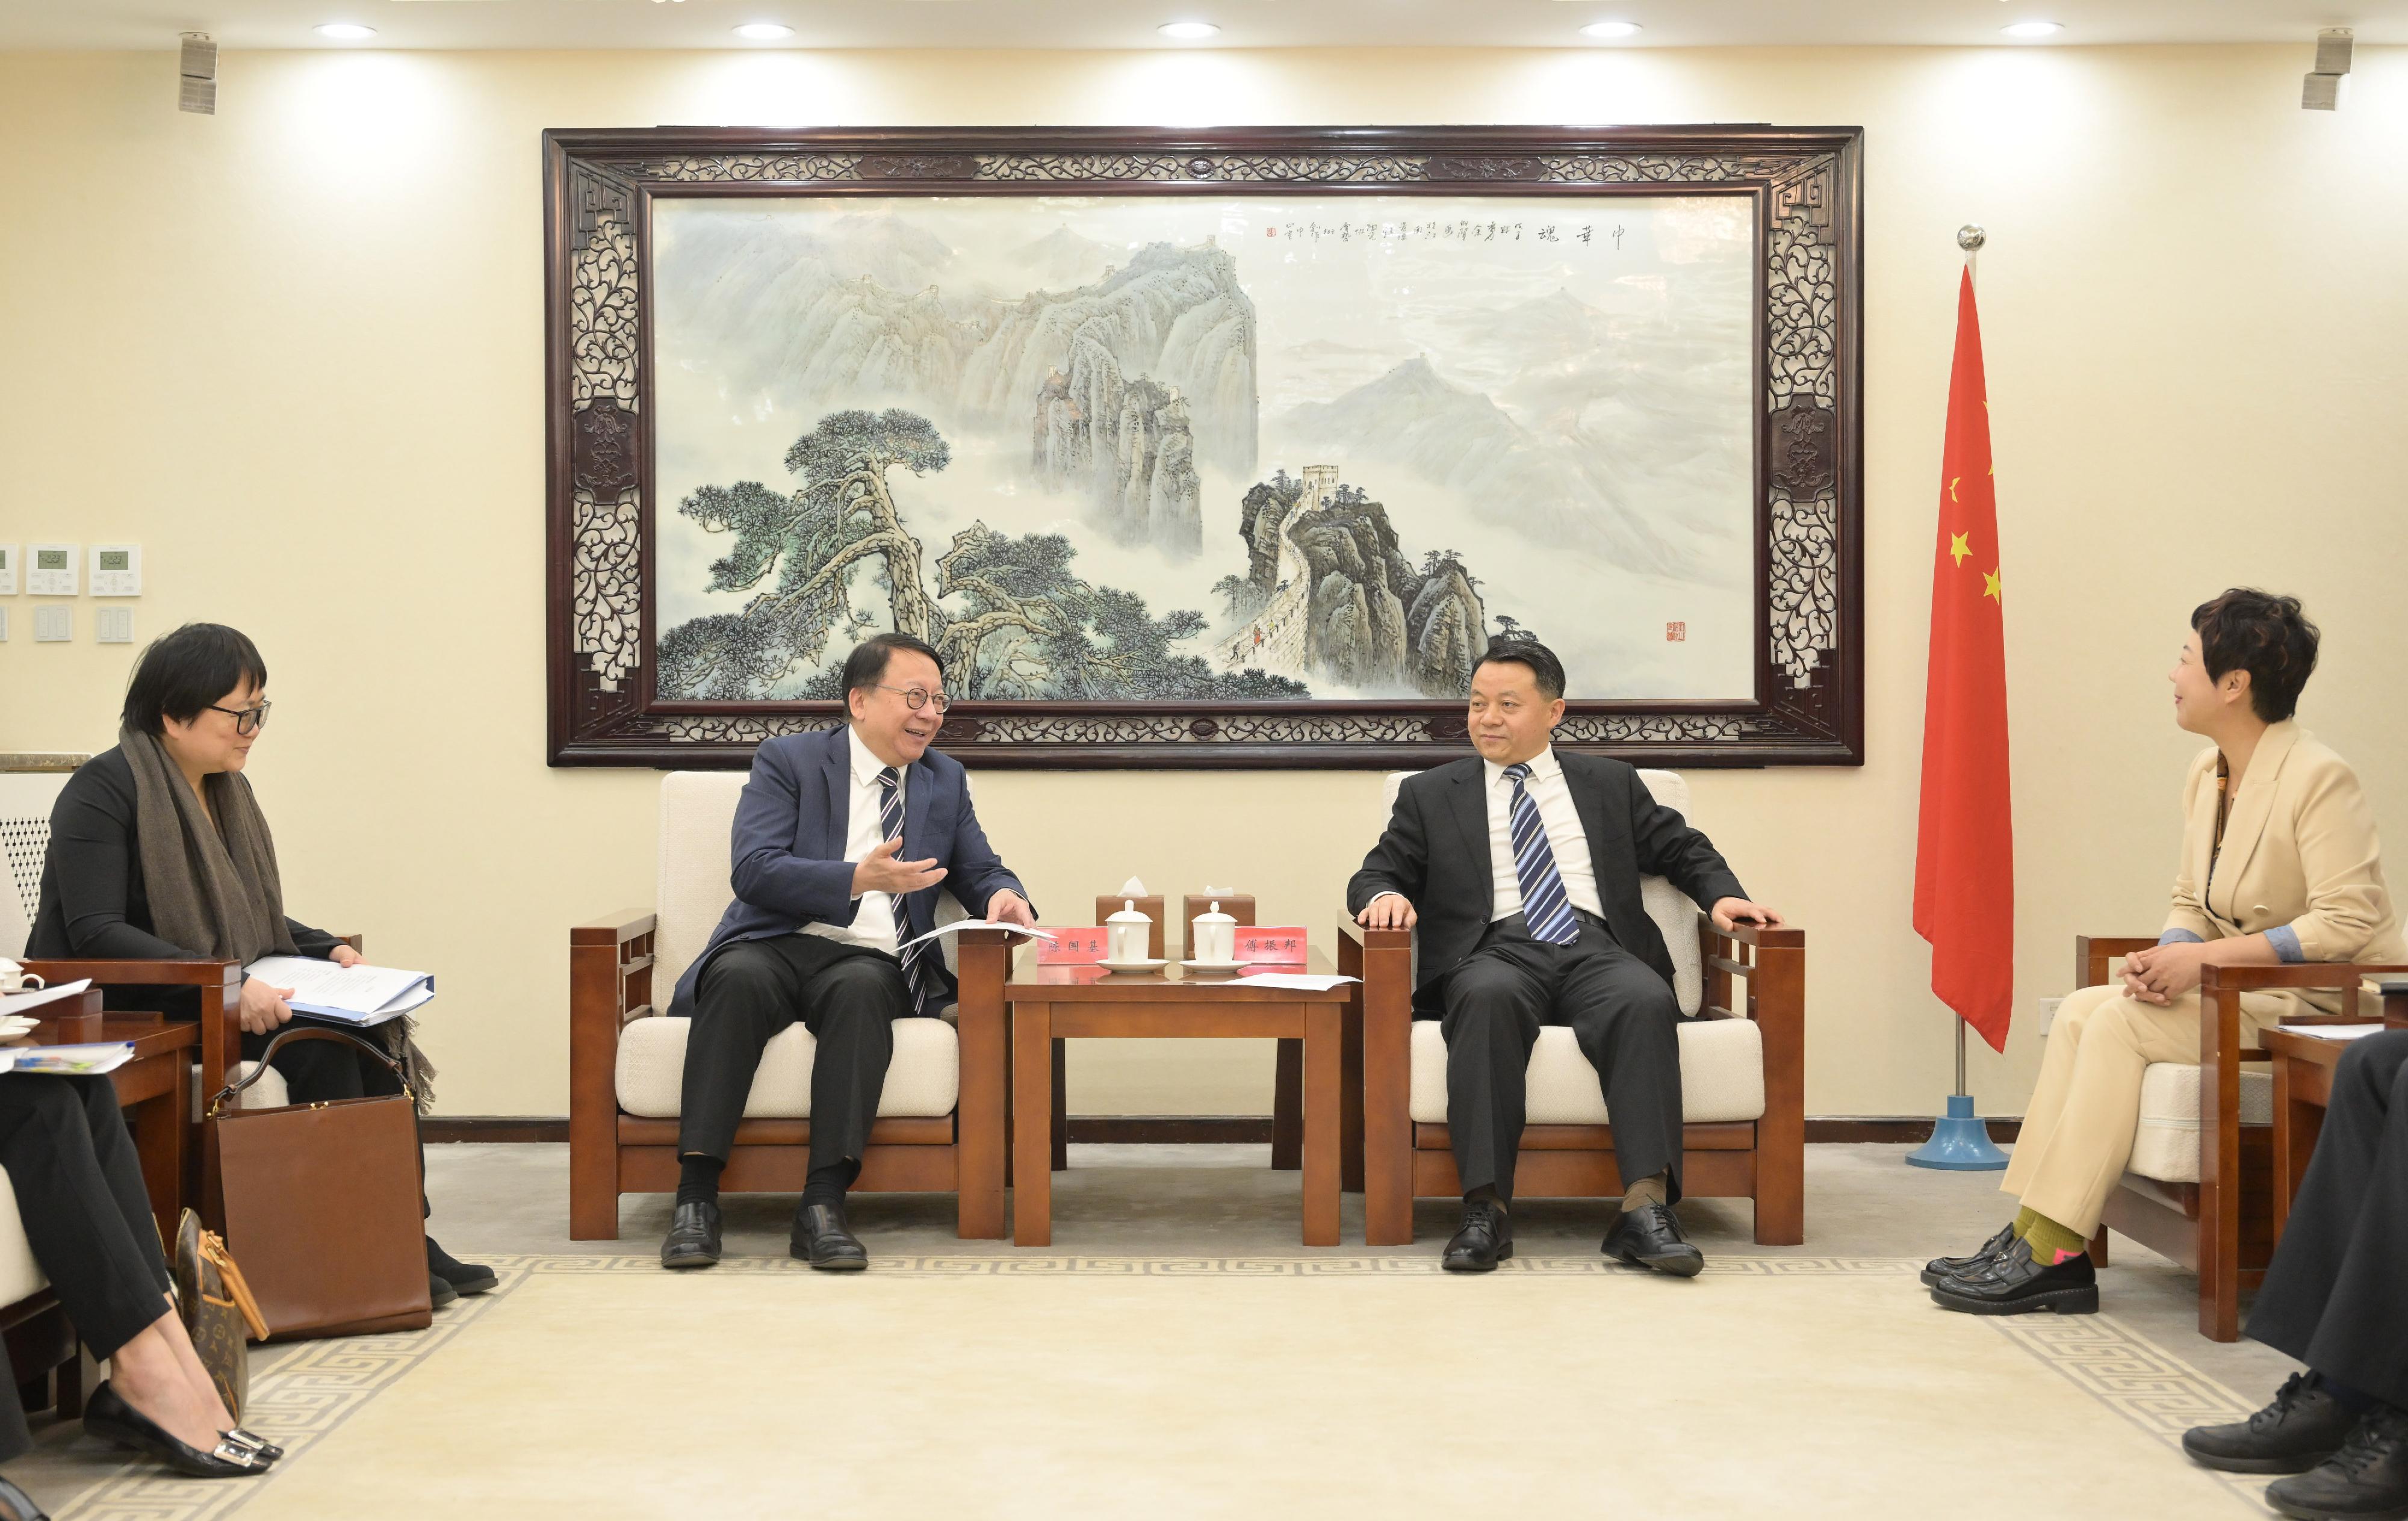 The Chief Secretary for Administration, Mr Chan Kwok-ki (second left), meets with Vice President of All-China Youth Federation Mr Fu Zhenbang (second right) in Beijing today (April 27). Also attending the meeting is the Deputy Director of the Office of the Government of the Hong Kong Special Administrative Region in Beijing, Miss Amy Yuen (first left).